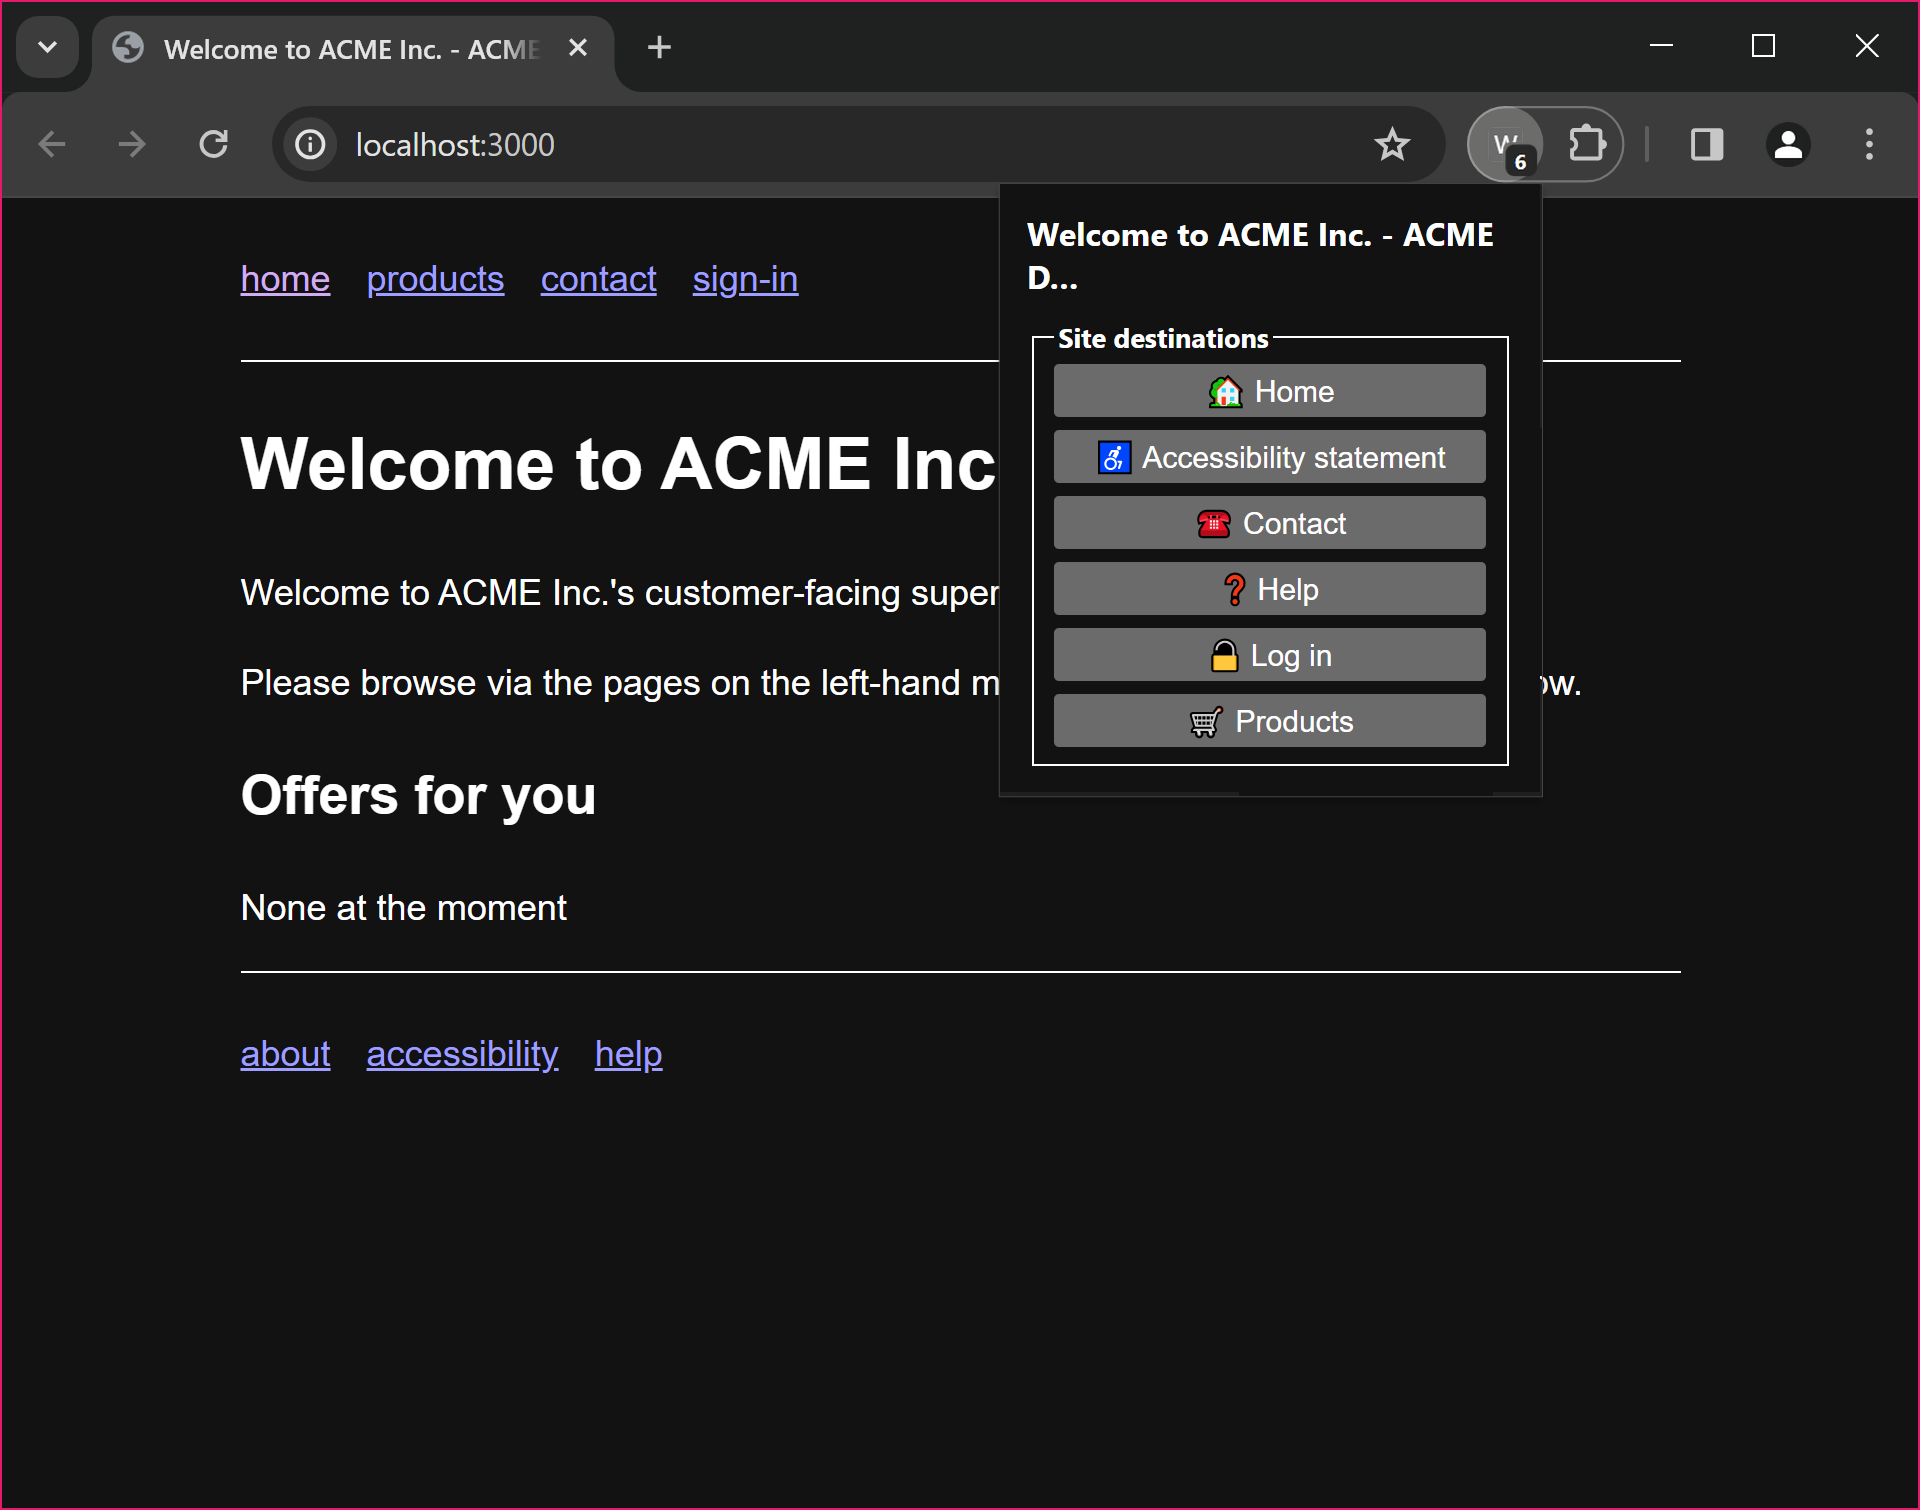 The ACME Inc. home page, with the extension pop-up open, showing 6 buttons, each containing emoji and accompanying text names for the well-known destinations offered by the site: home, accessibility statement, contact, help, log in, and products.